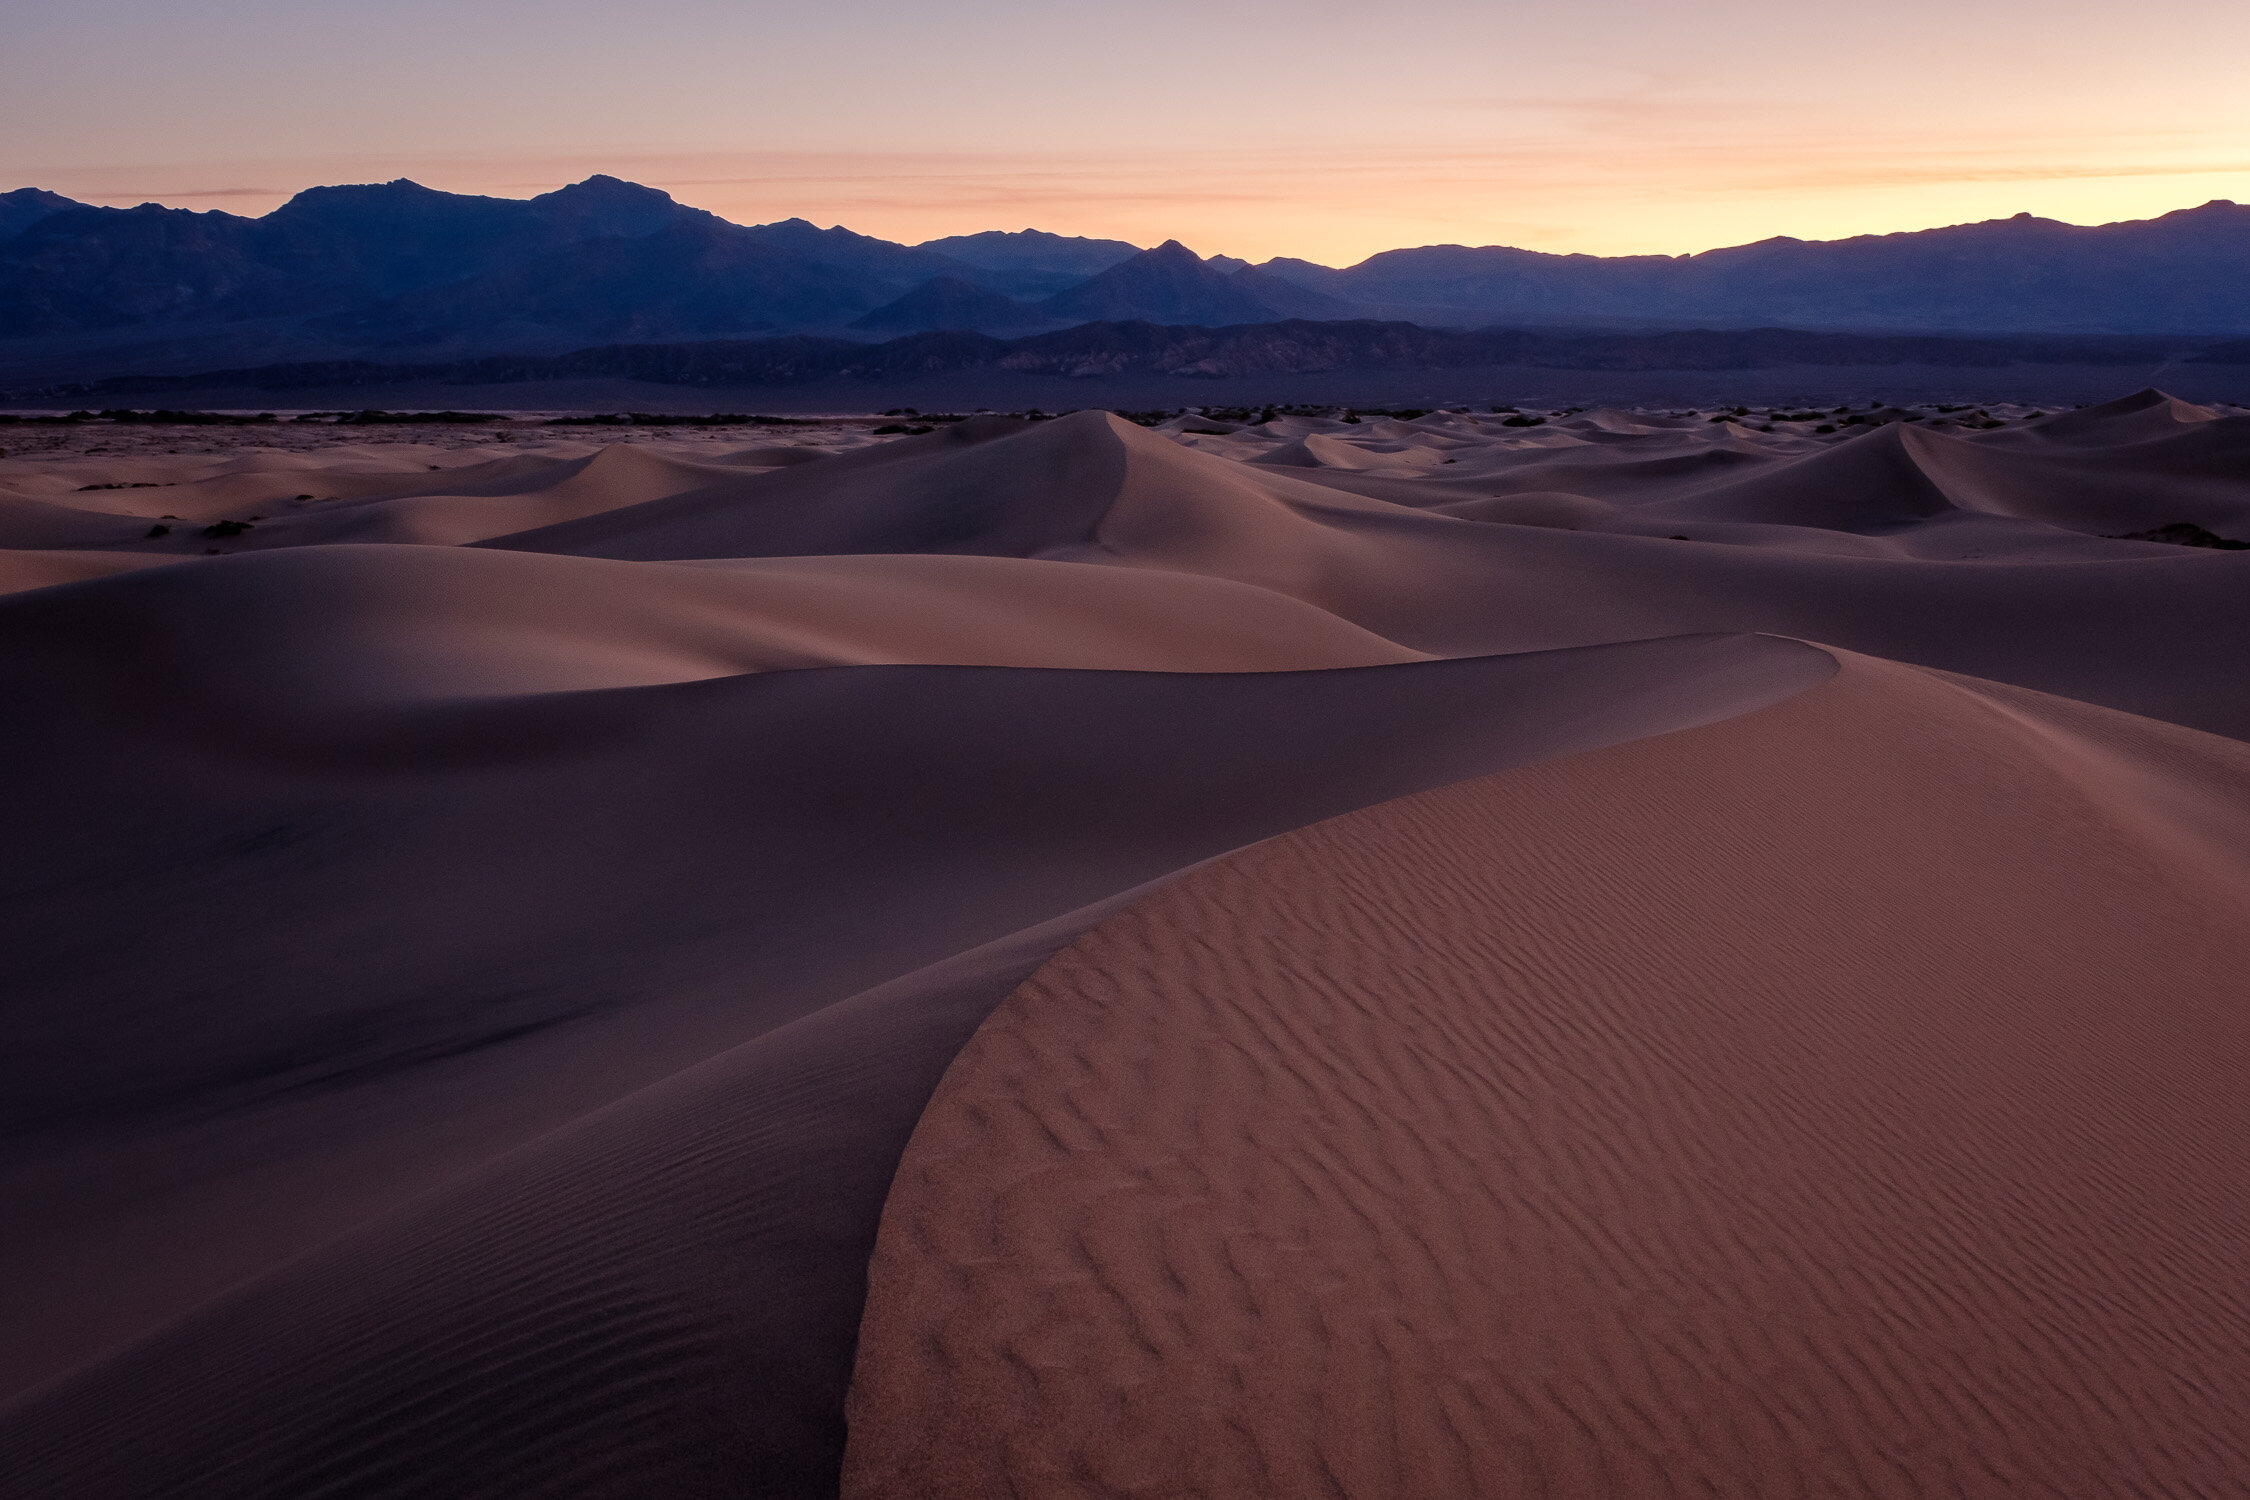  Mesquite Flats Sand Dunes at dawn, Death Valey National Park, March 2020. 